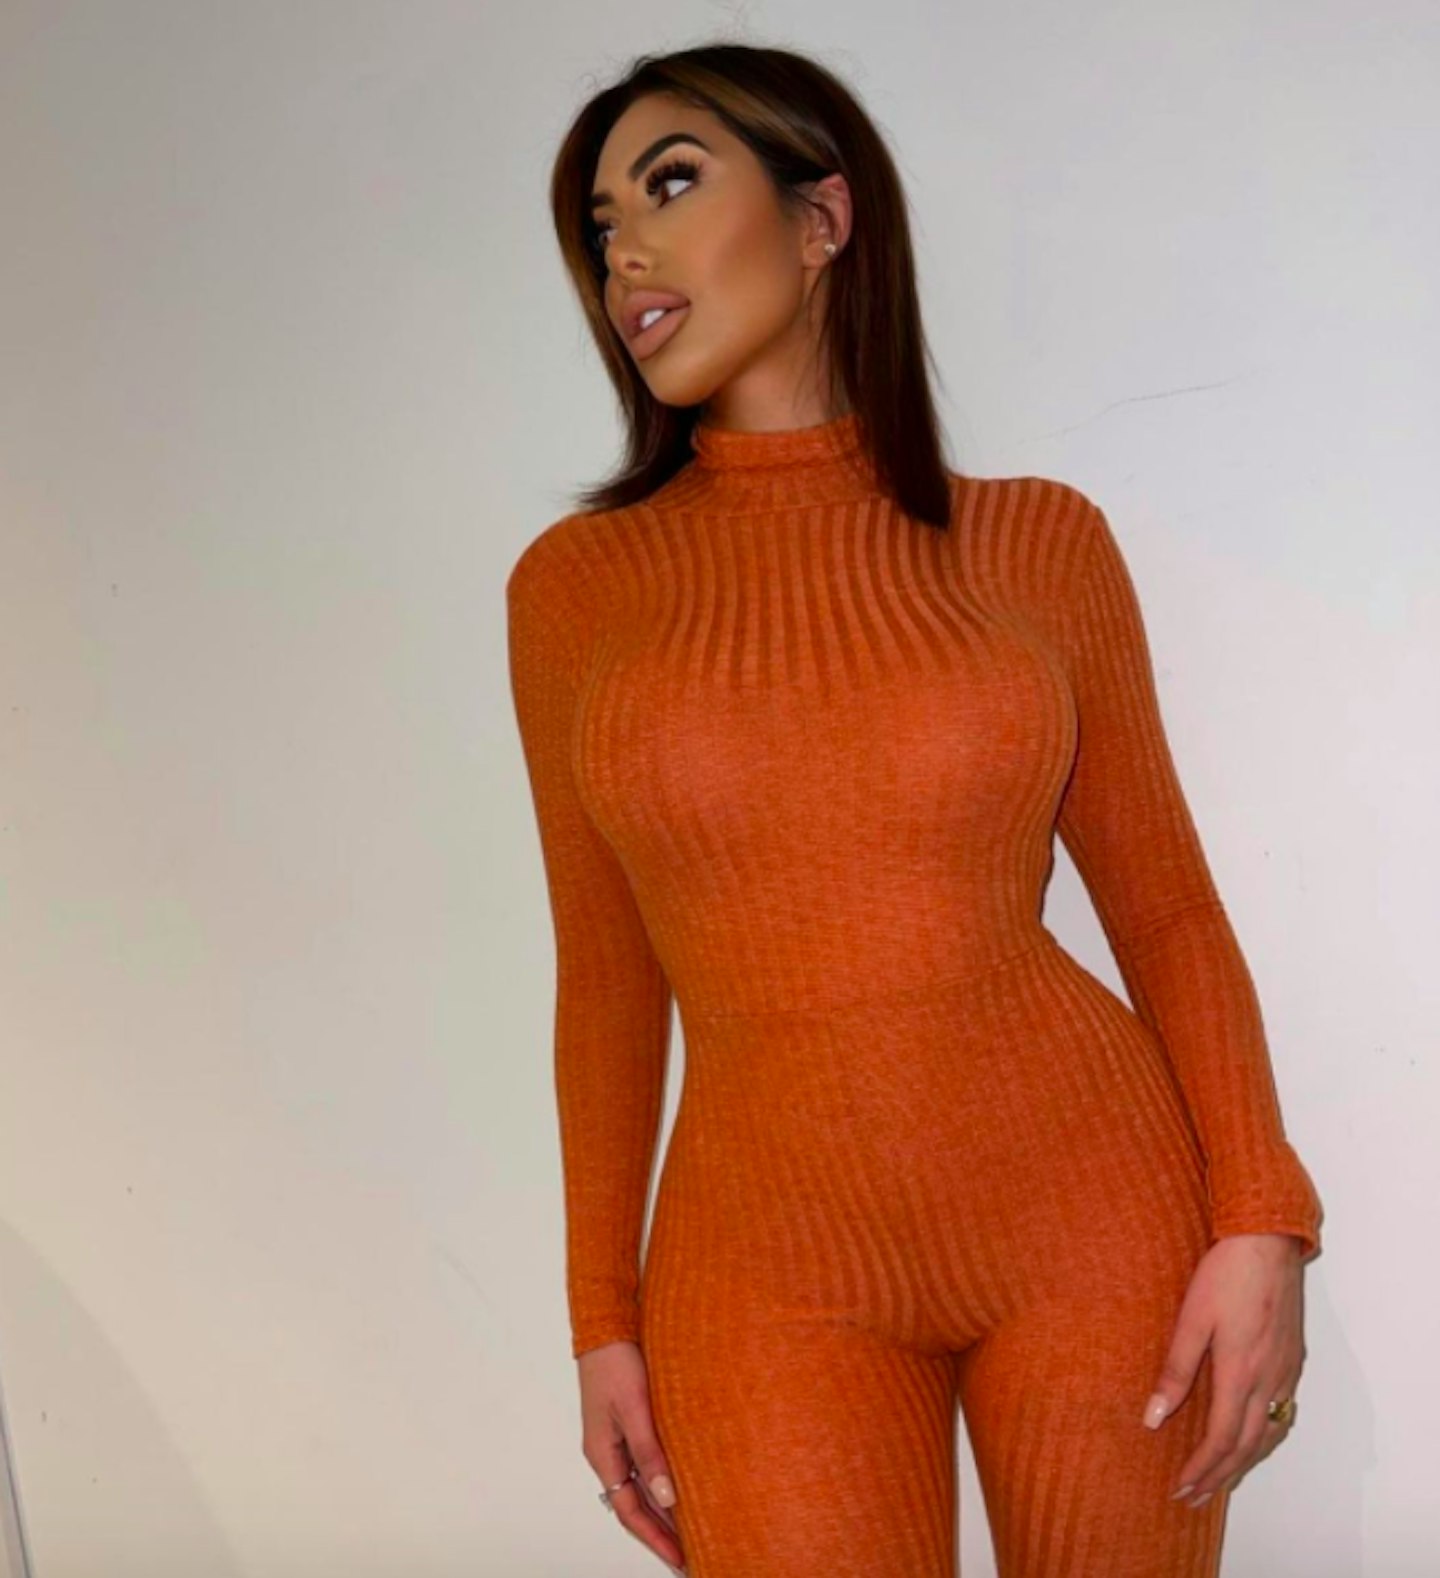 Chloe Ferry battles to stop her boobs popping out as she is caught